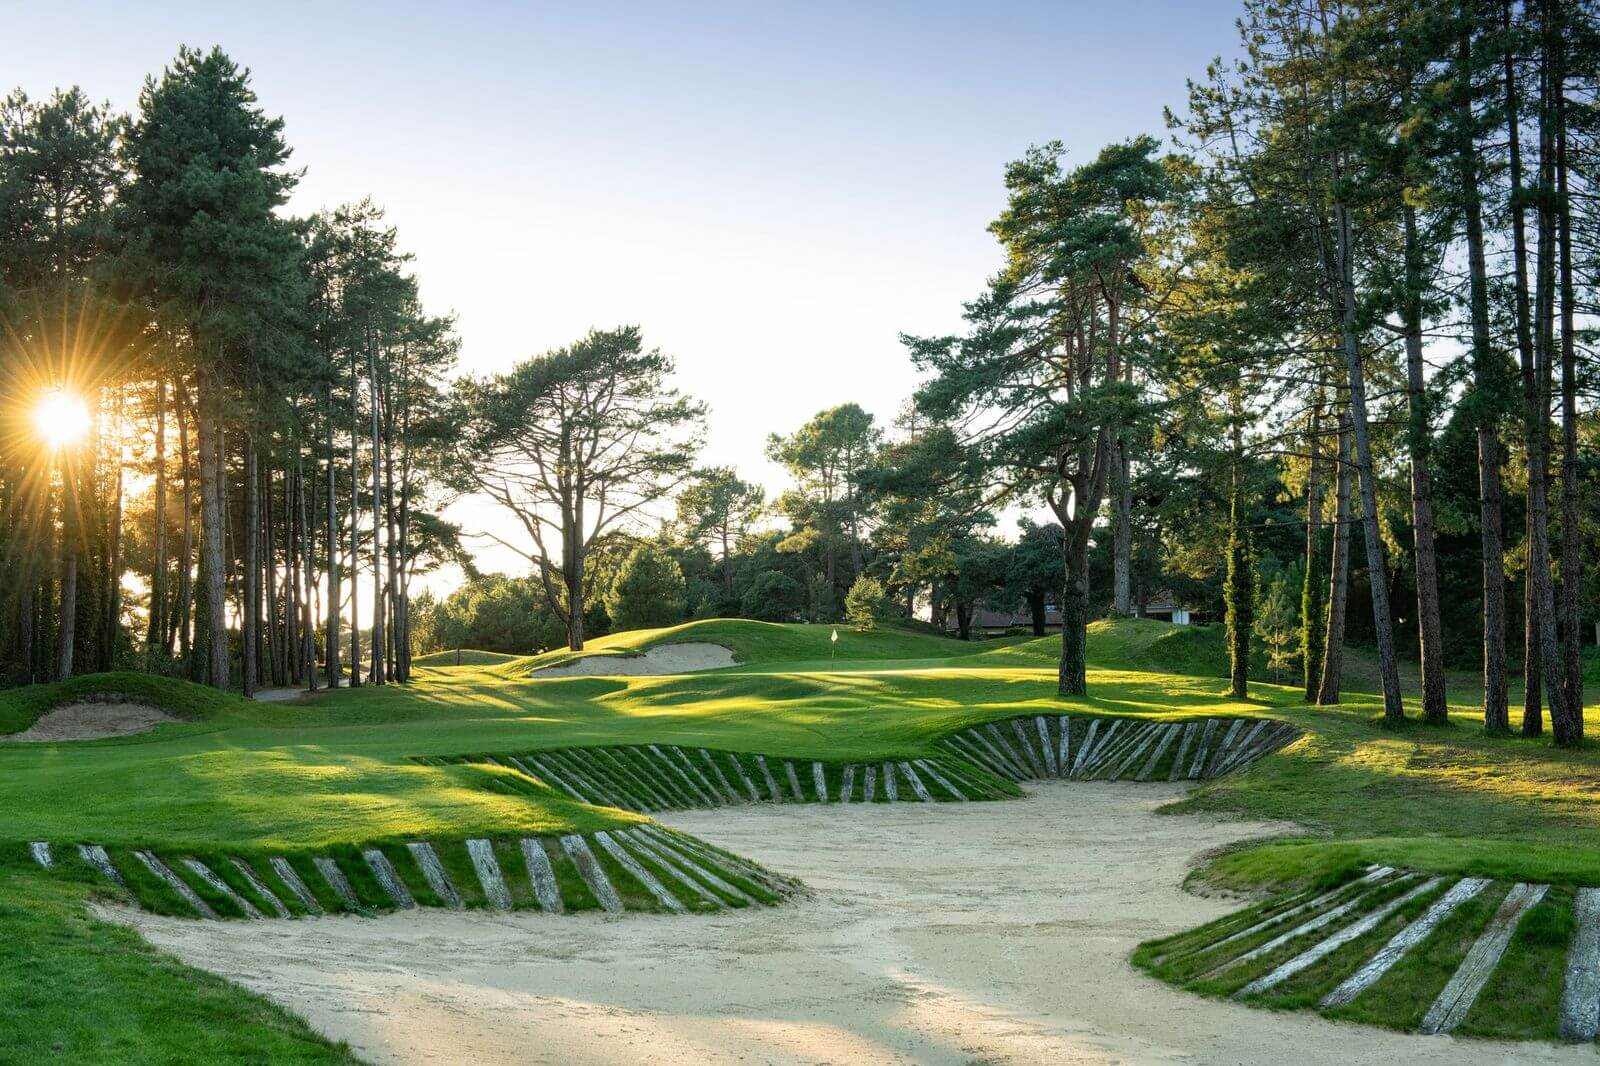 Large bunker protecting the green on Hardelot Les Dunes' third hole with trees surrounding and sun rising